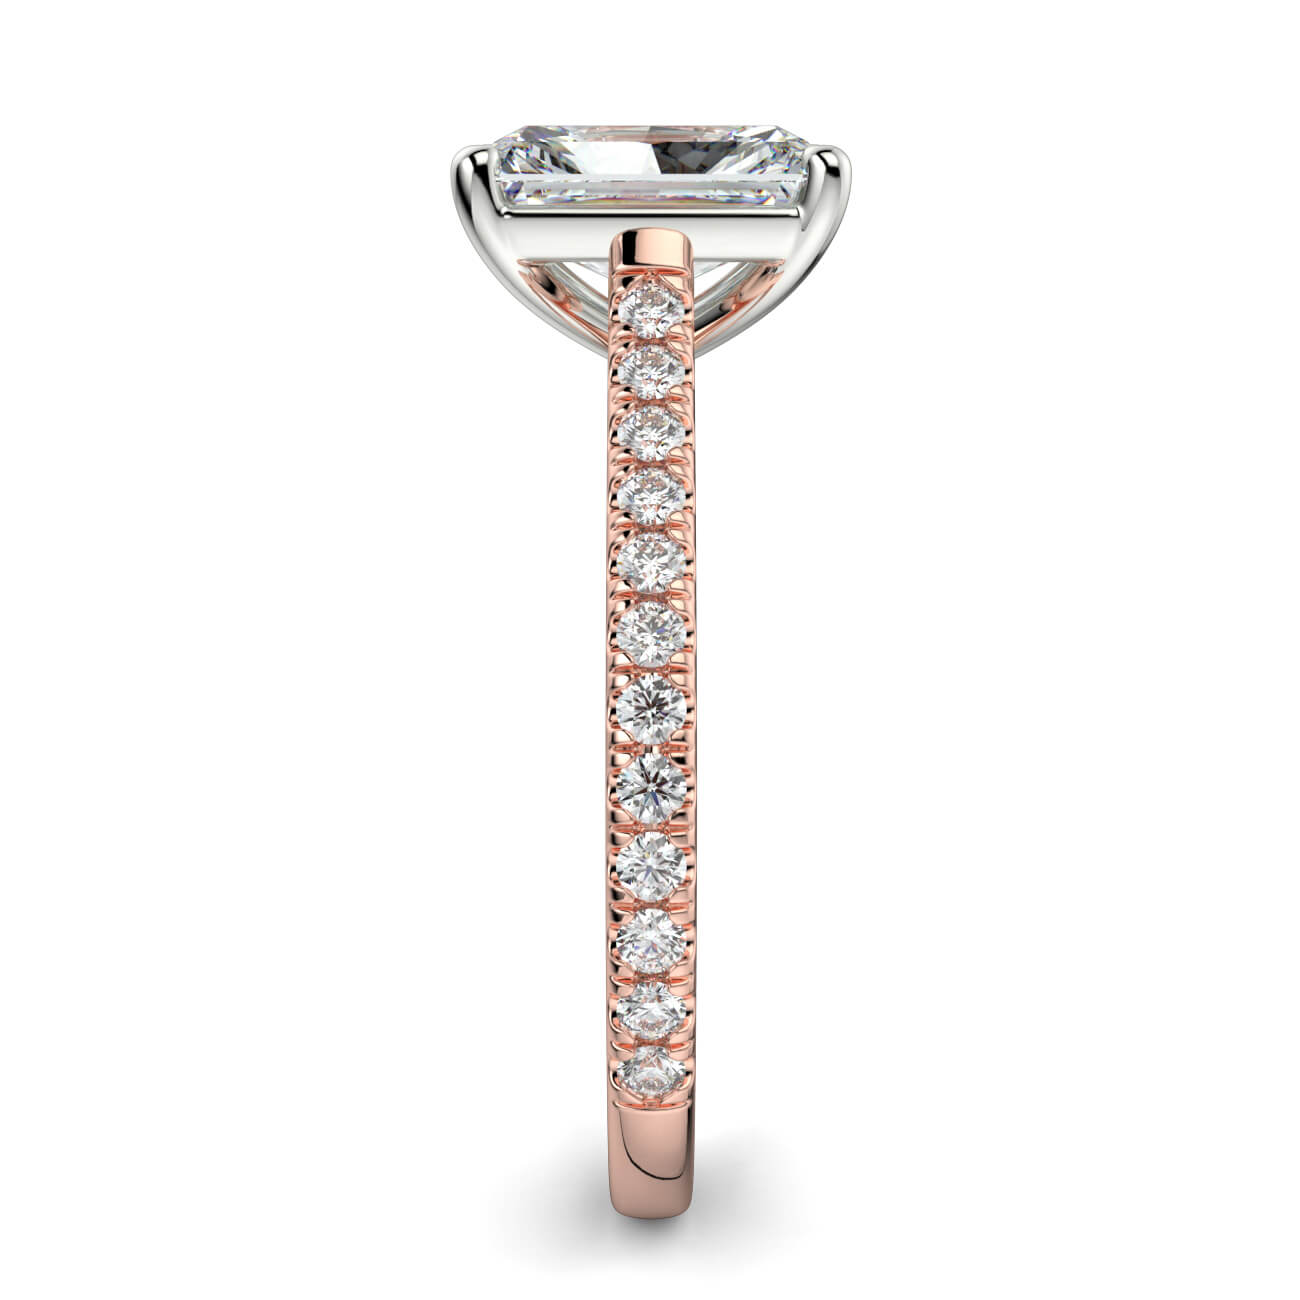 Radiant cut diamond cathedral engagement ring in rose and white gold – Australian Diamond Network